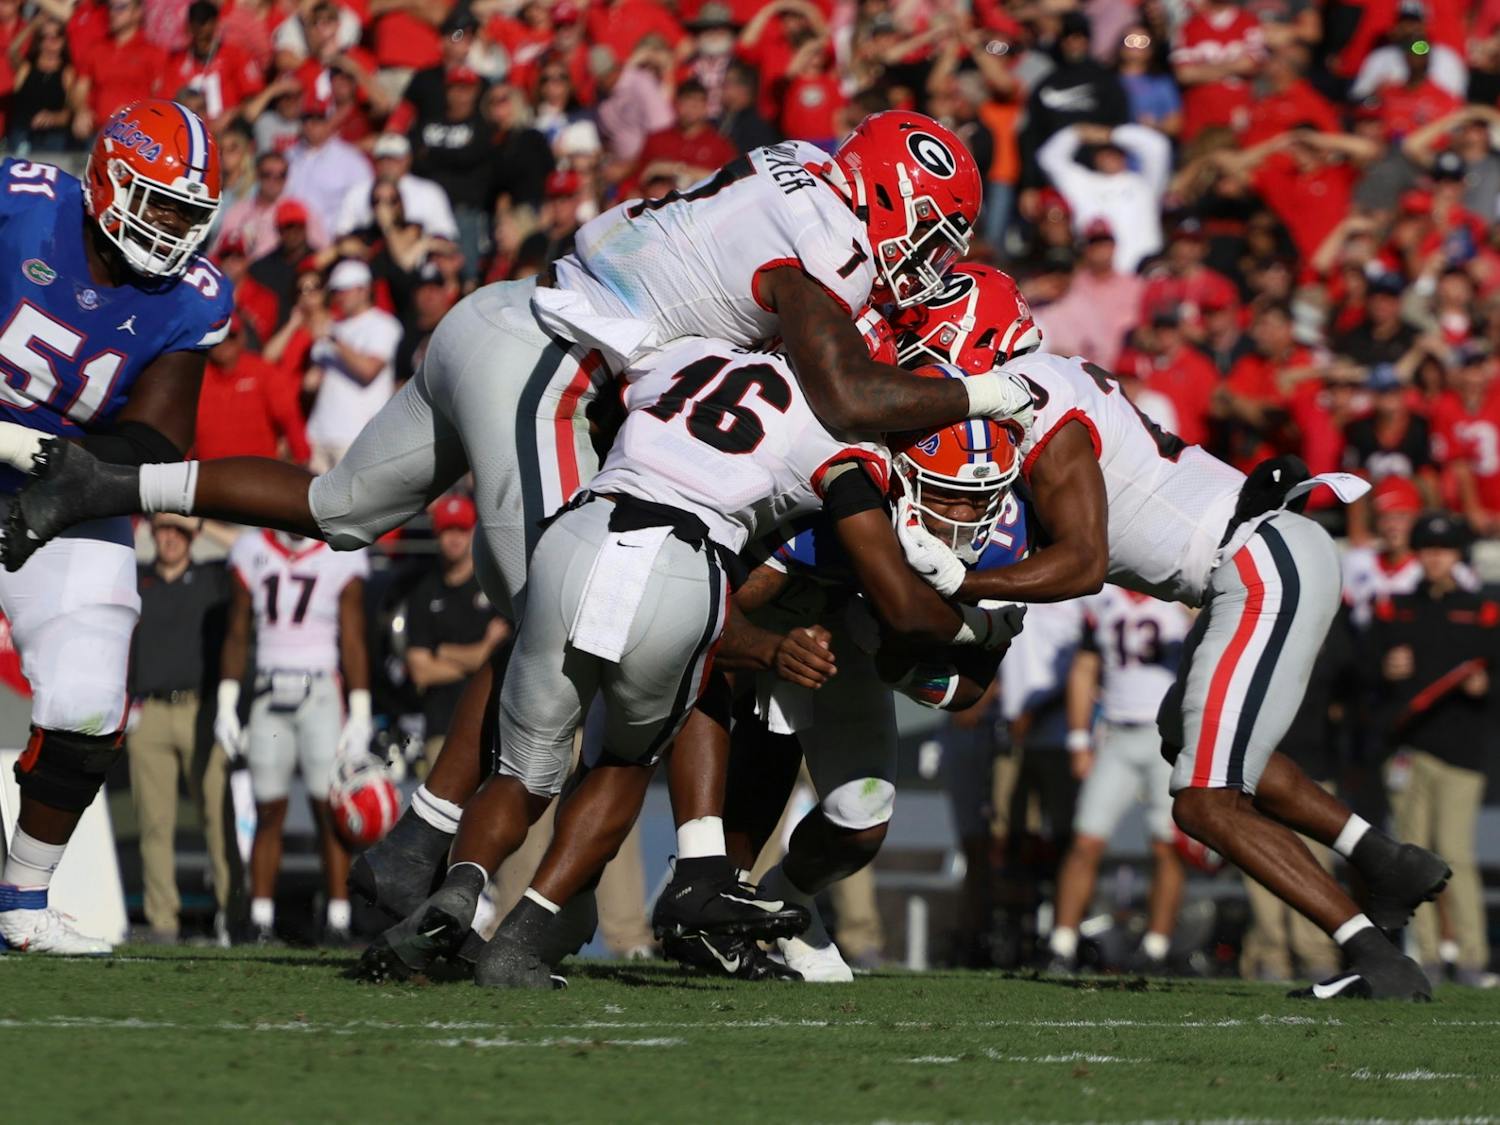 Georgia defenders swarm Florida quarterback Anthony Richardson during the first half of the Gators' 34-7 loss to Georgia on Oct. 30, 2021.